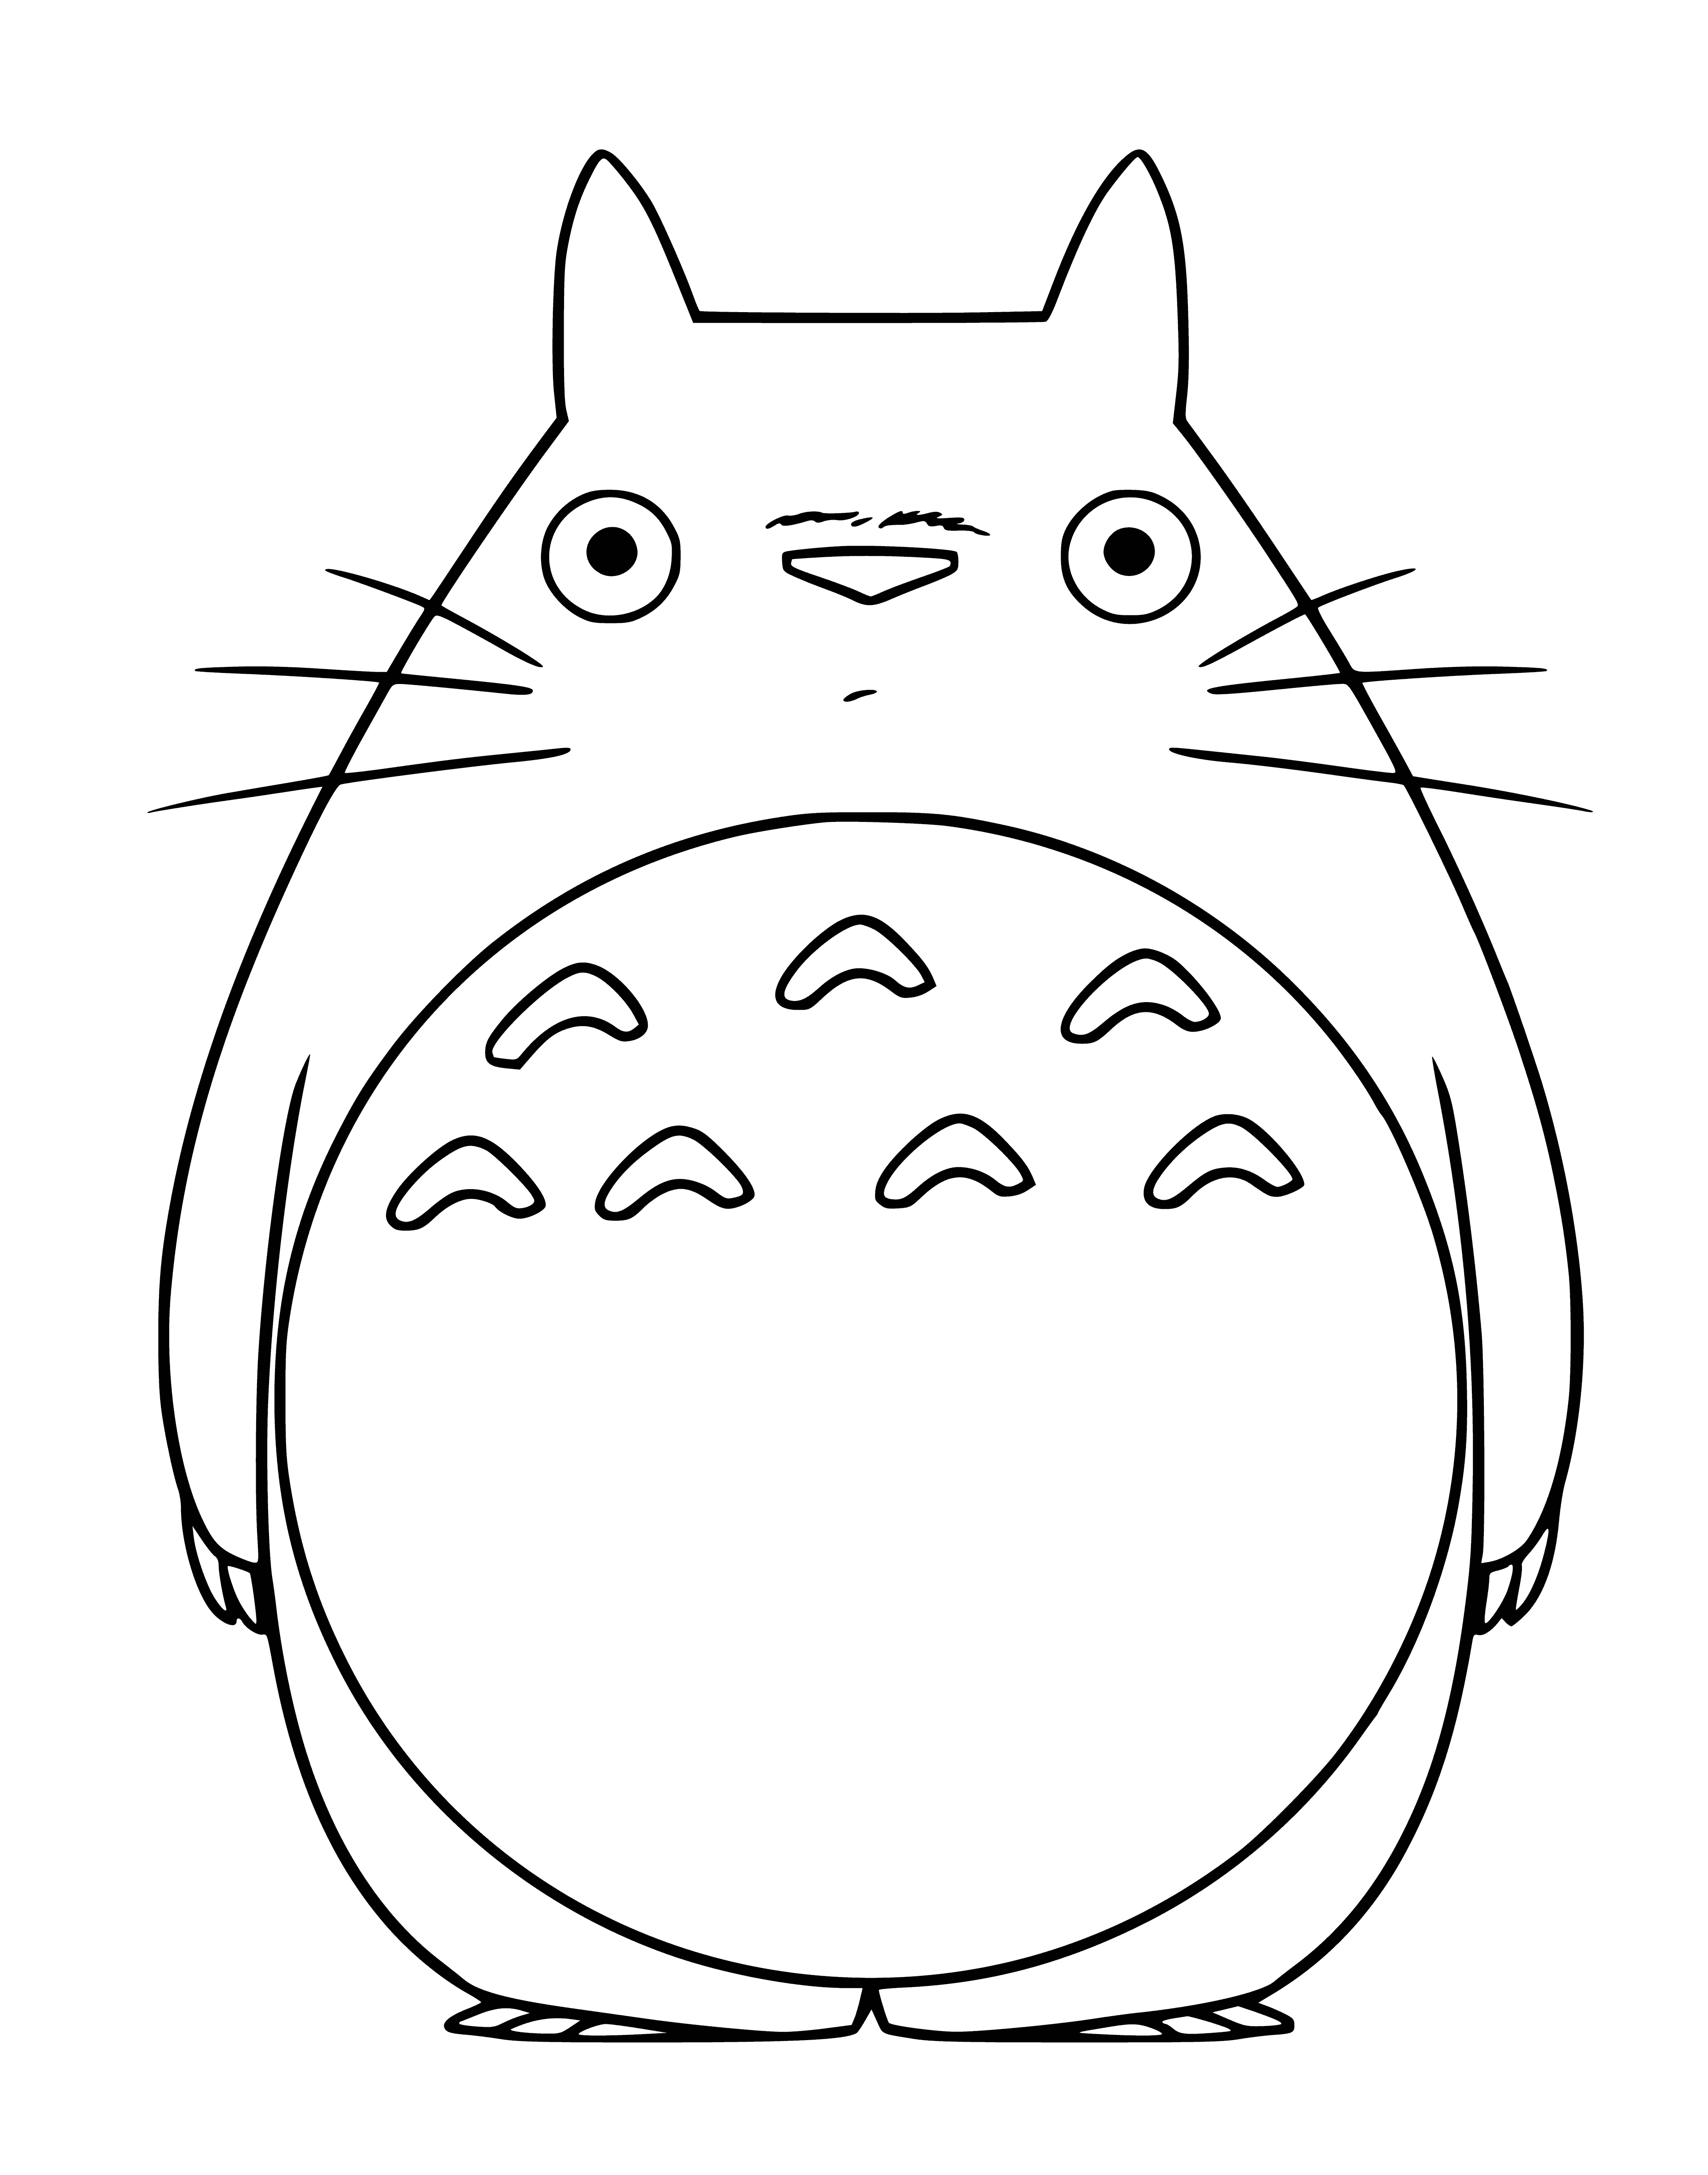 coloring page: Cartoon creature with cat/rabbit features wearing white/blue sitting on branch. Has big ears, eyes, belly and two small front teeth. #CartoonCreature